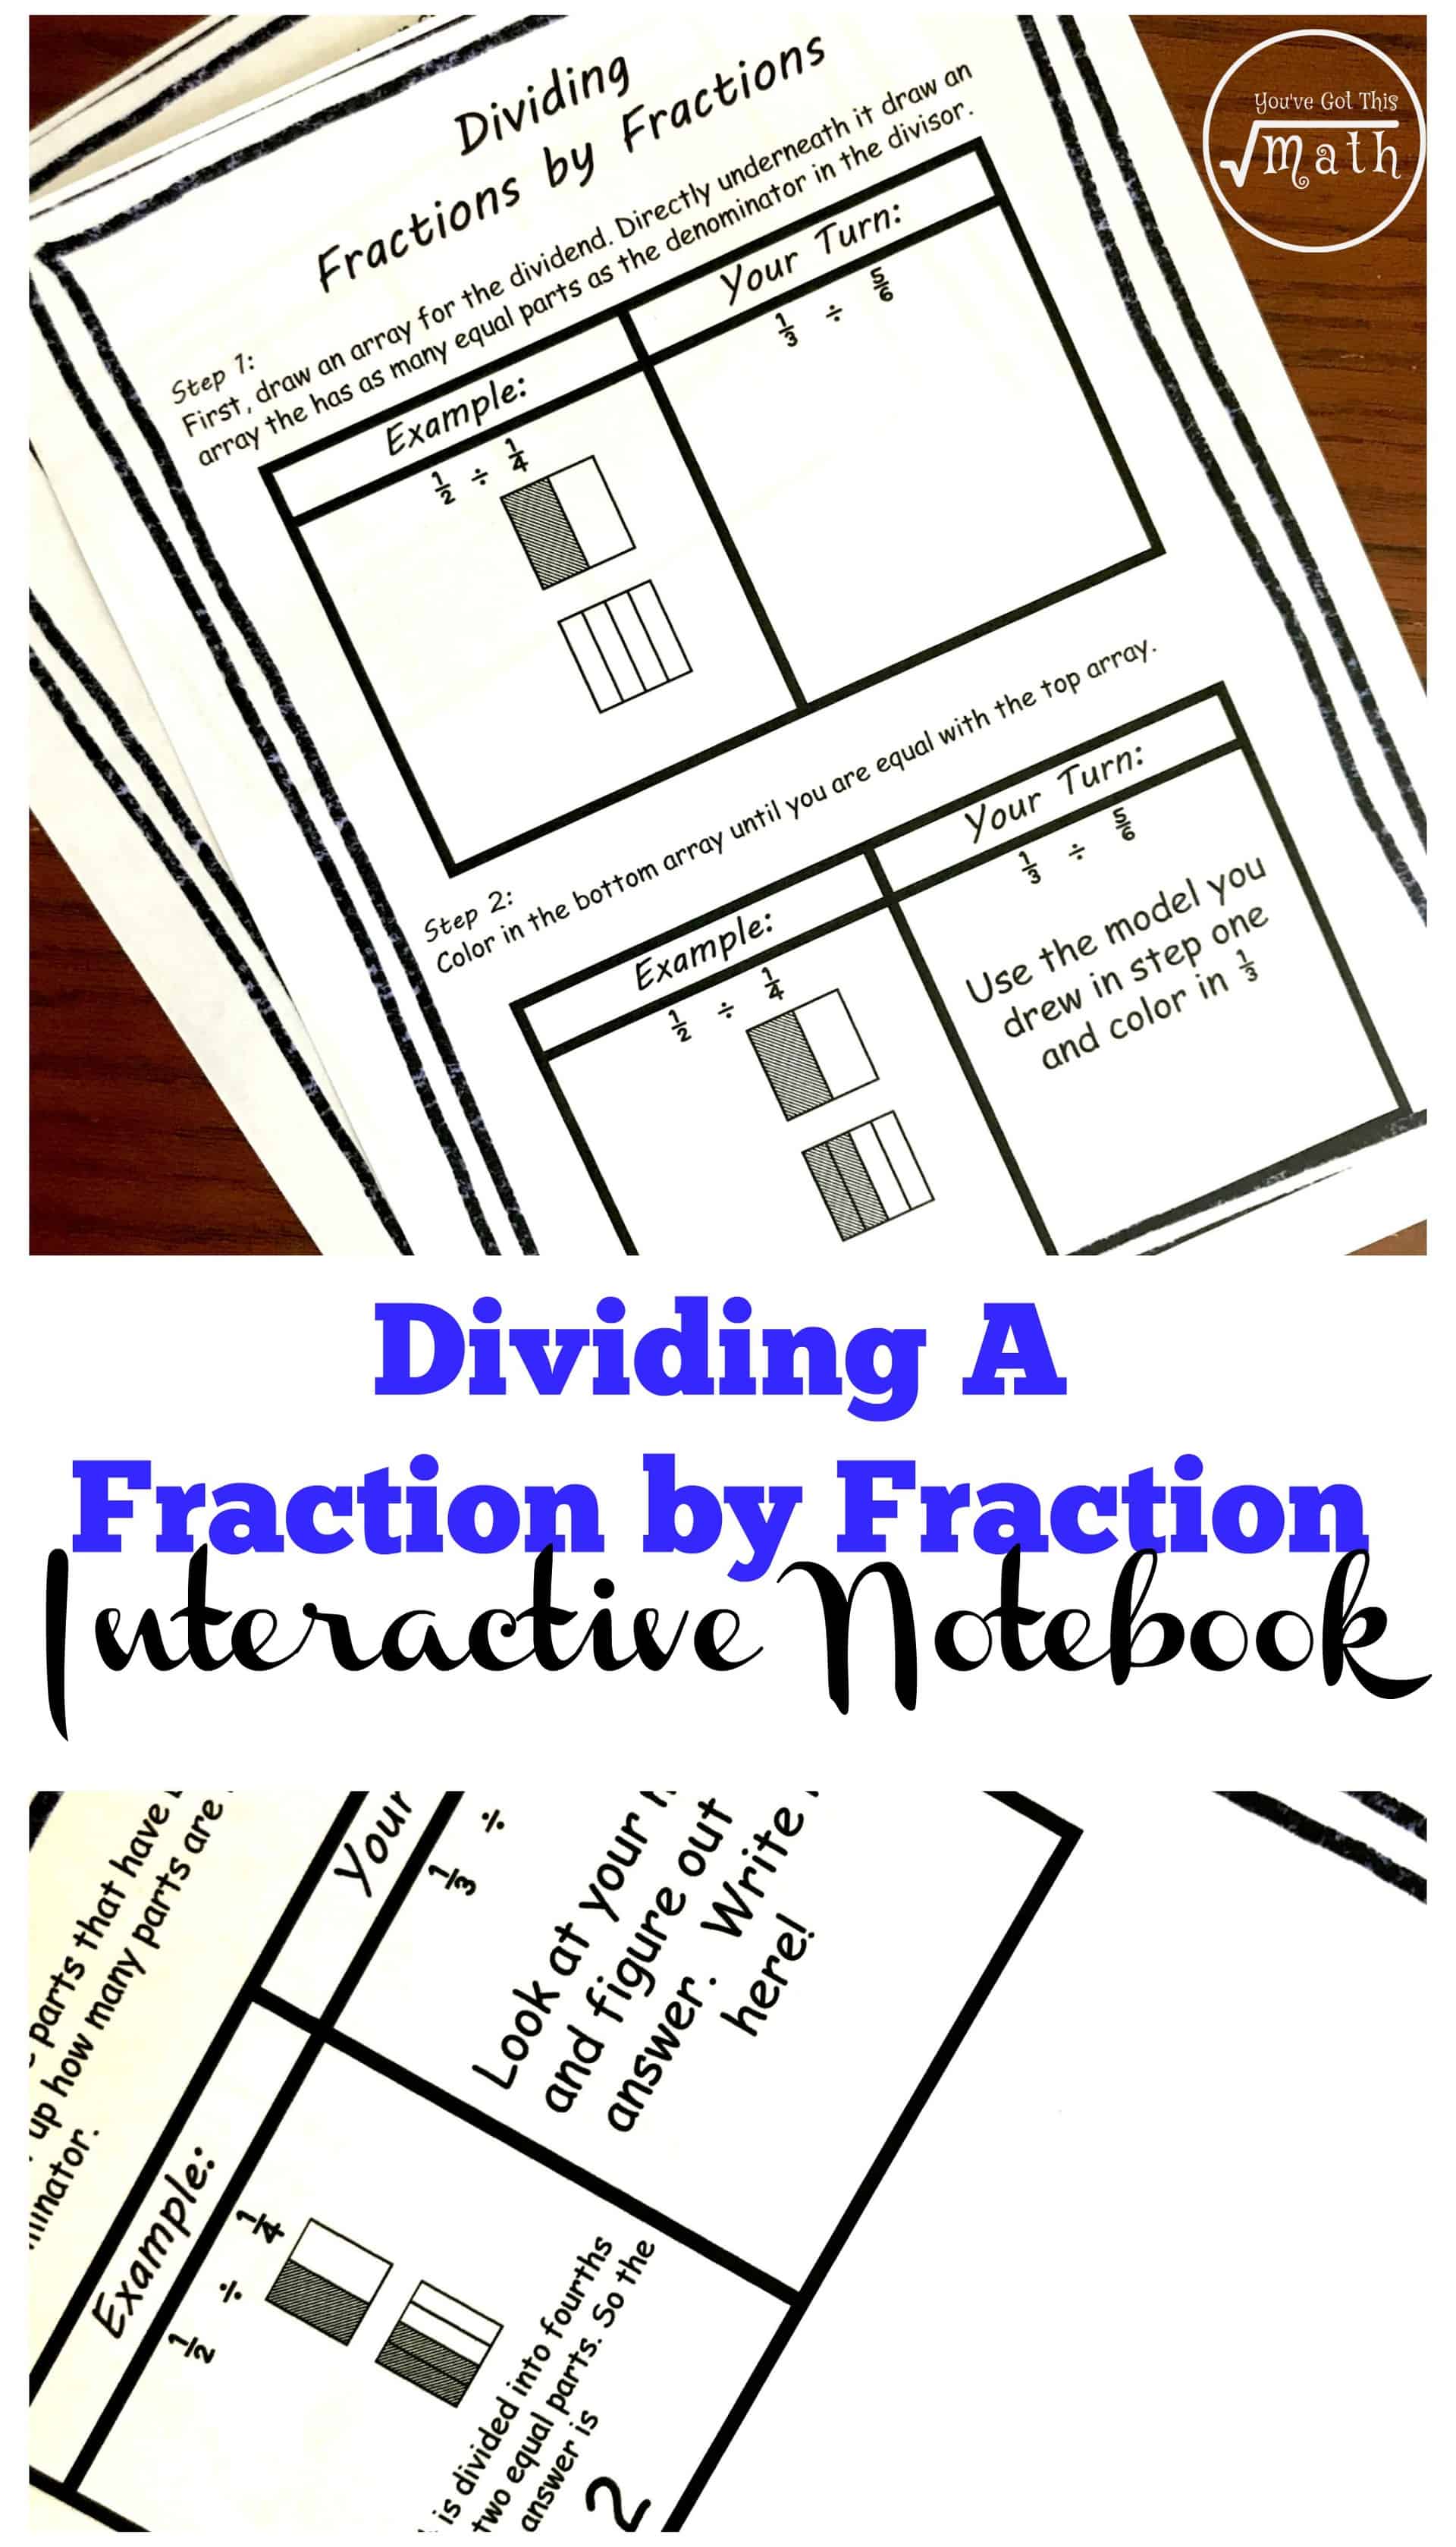 FREE Interactive Notebook To Provide Dividing Fractions Examples